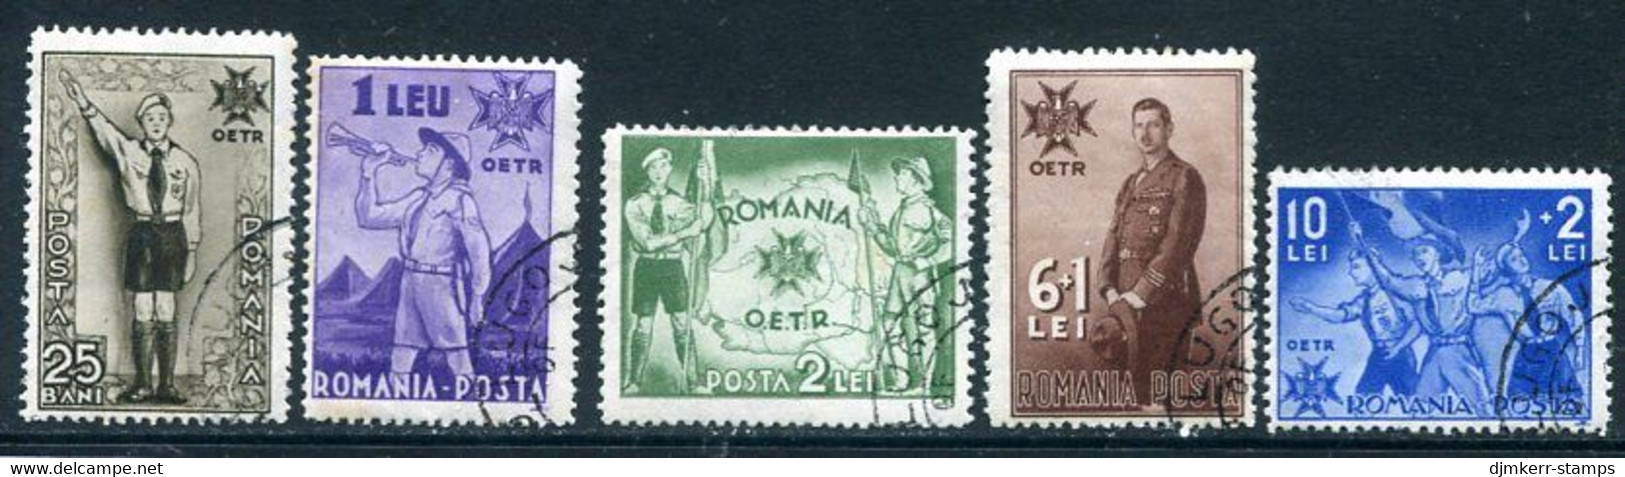 .ROMANIA 1935 Anniversary Of Accession  Used.  Michel 484-88 - Used Stamps